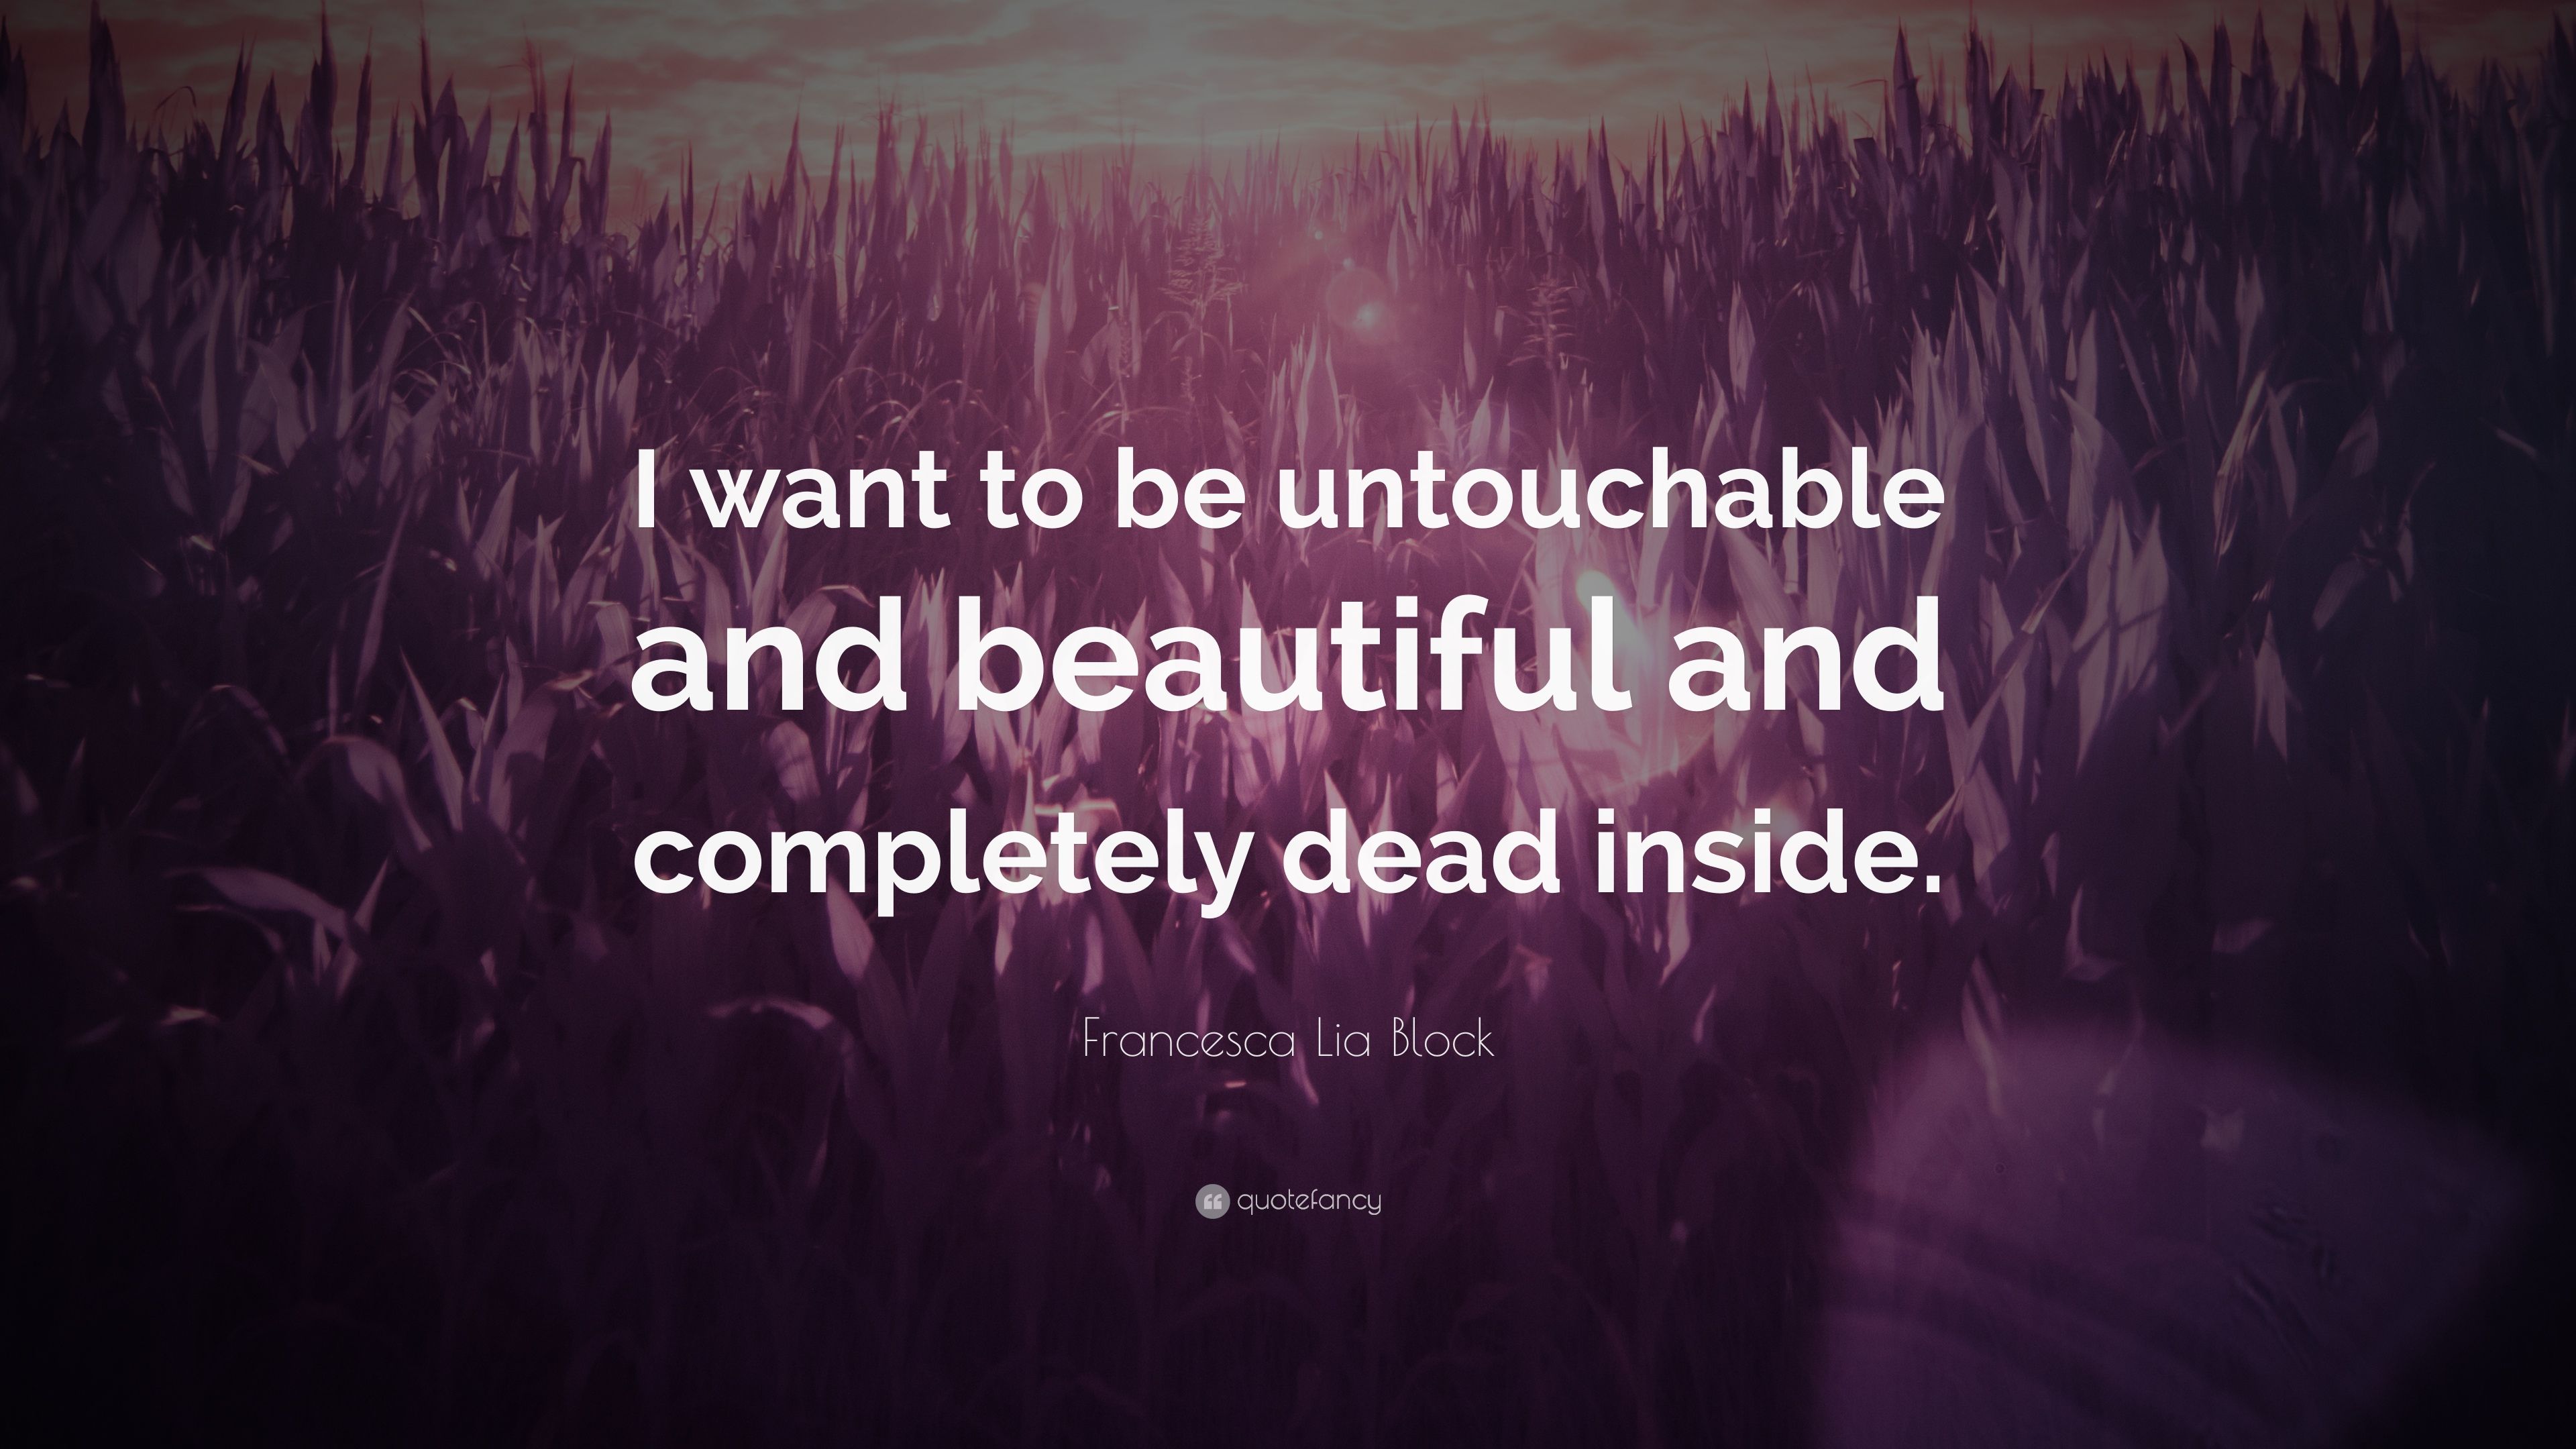 Francesca Lia Block Quote: “I want to be untouchable and beautiful